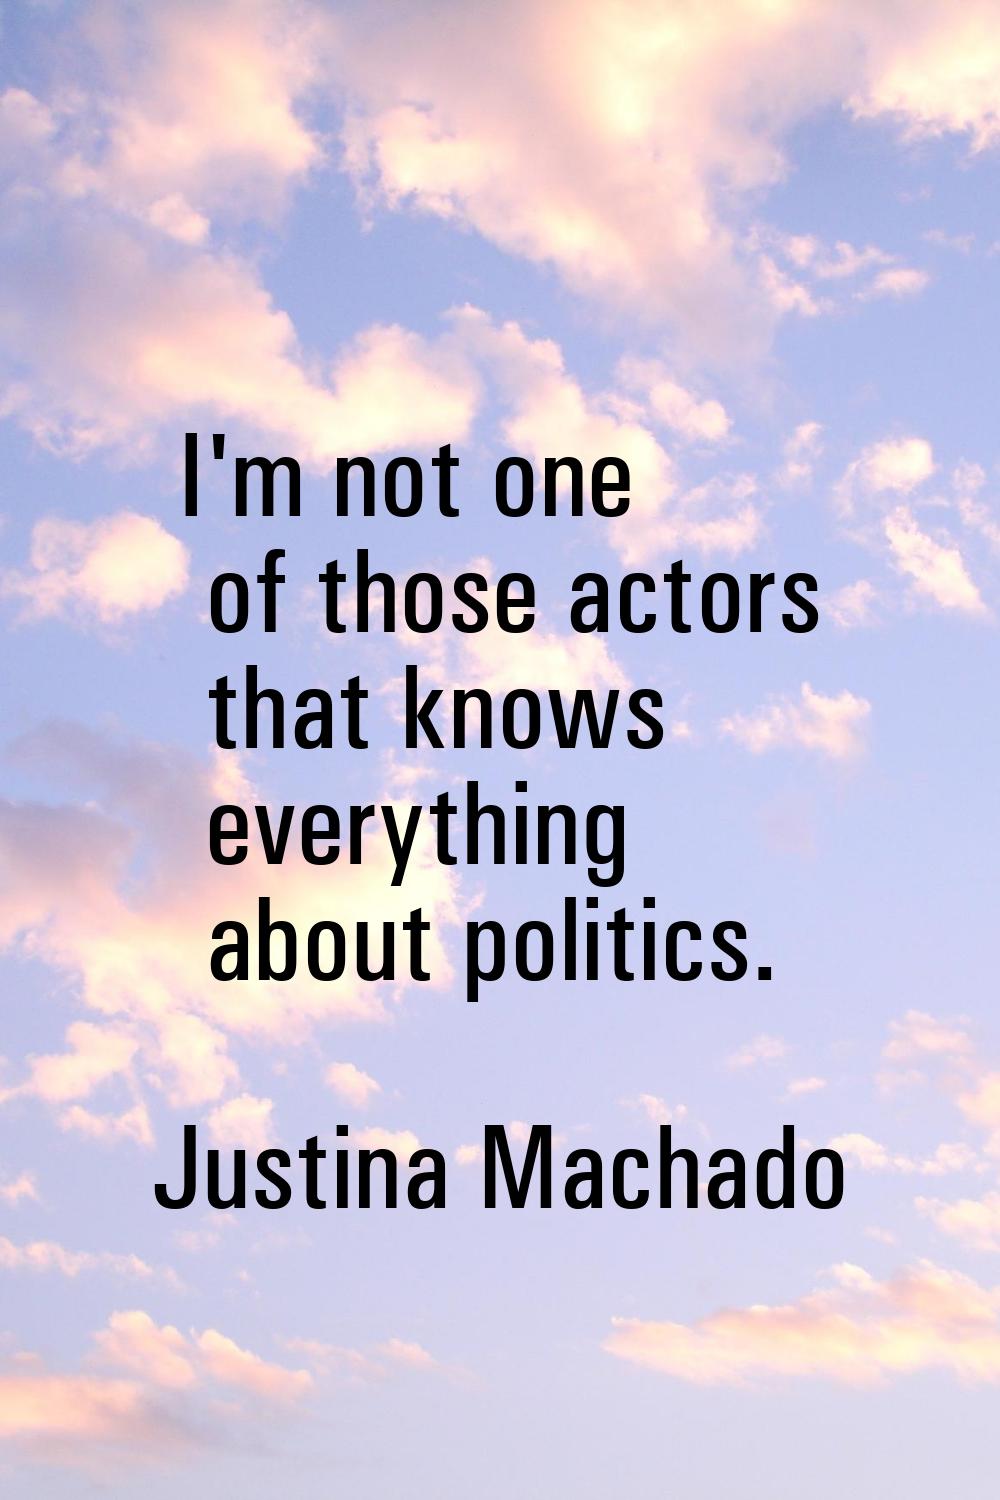 I'm not one of those actors that knows everything about politics.